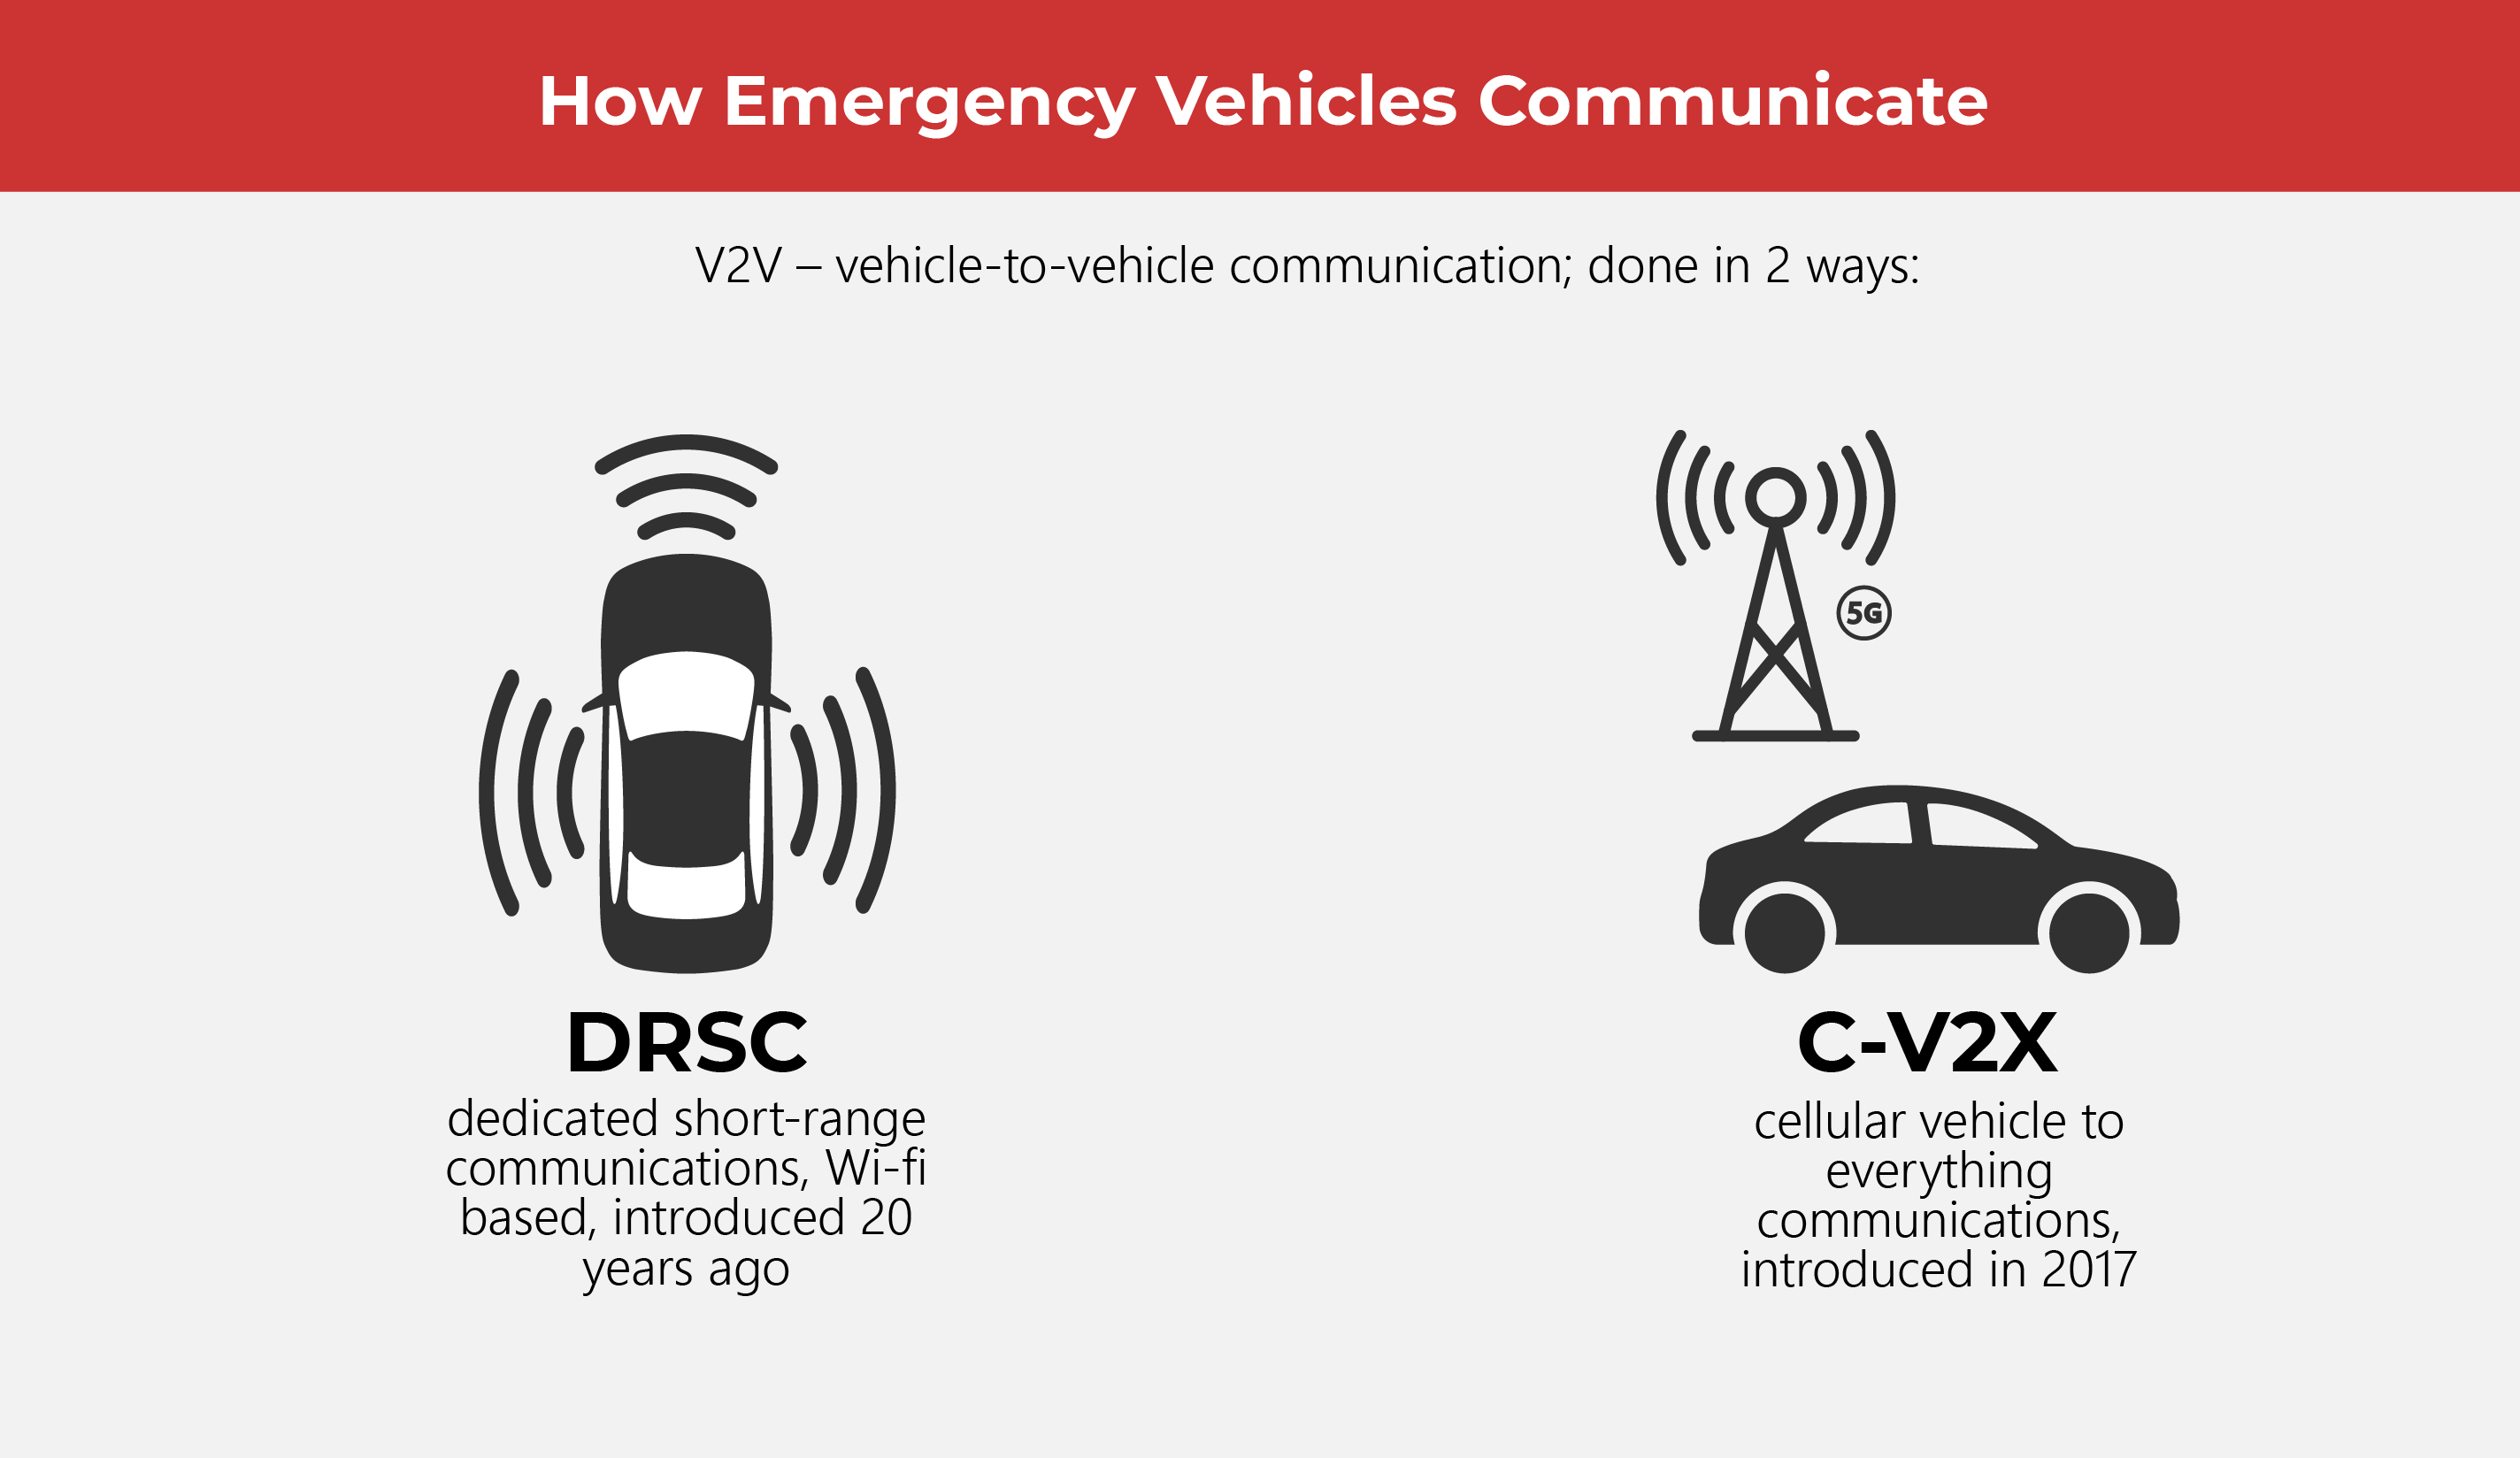 Safer and Smarter Solutions for Emergency Vehicles